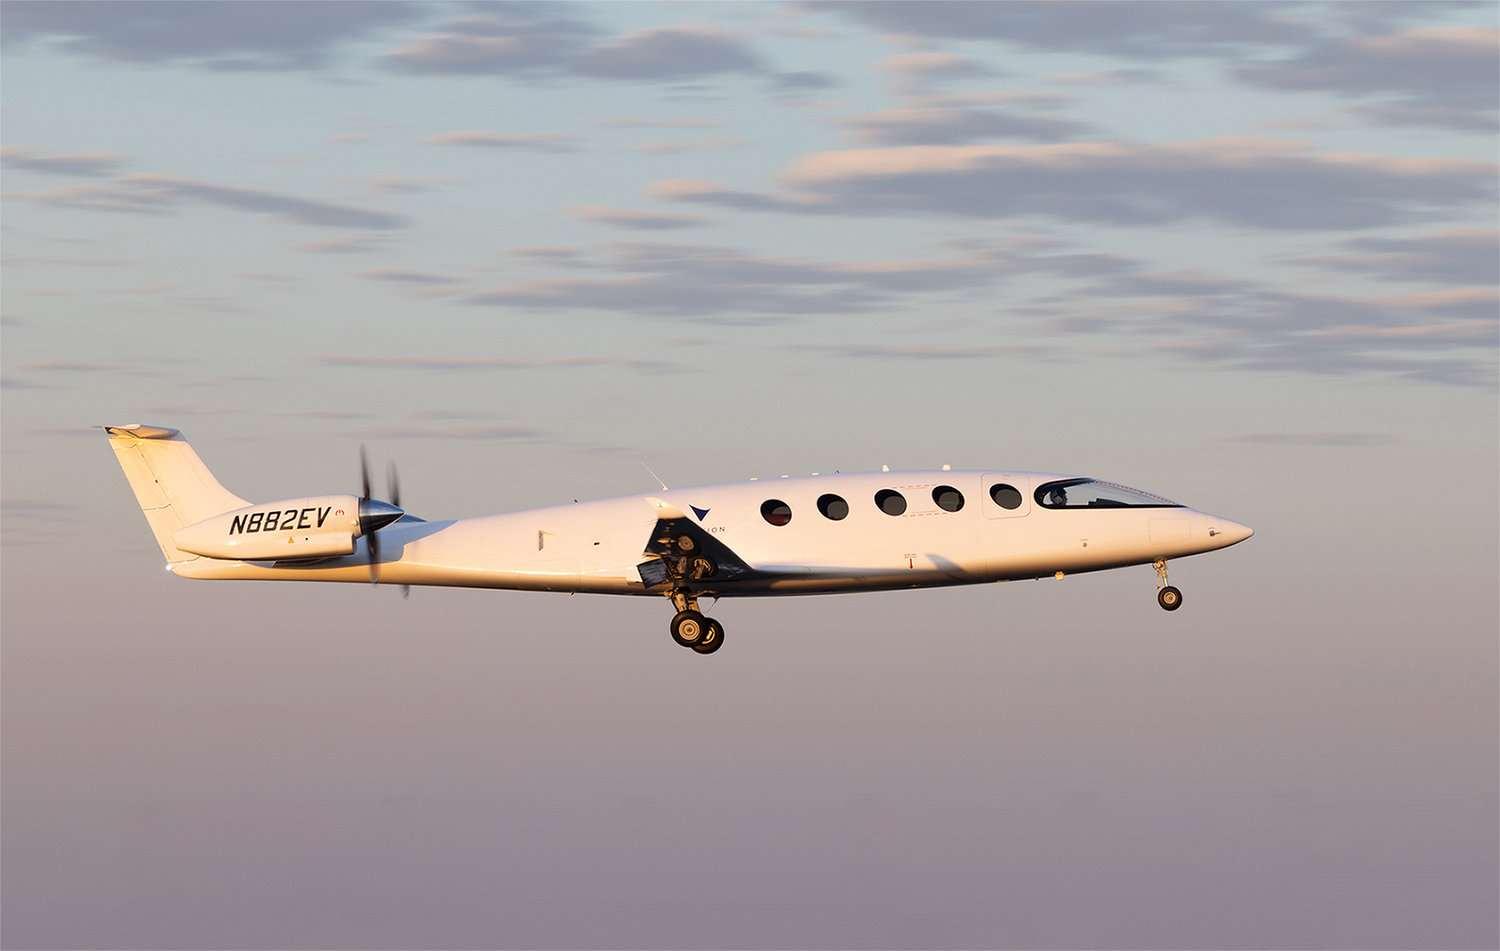 Cape Air has ordered dozens of the Eviation Alice Aircraft, an all-electric nine-passenger plane, for use on its short routes around the country.